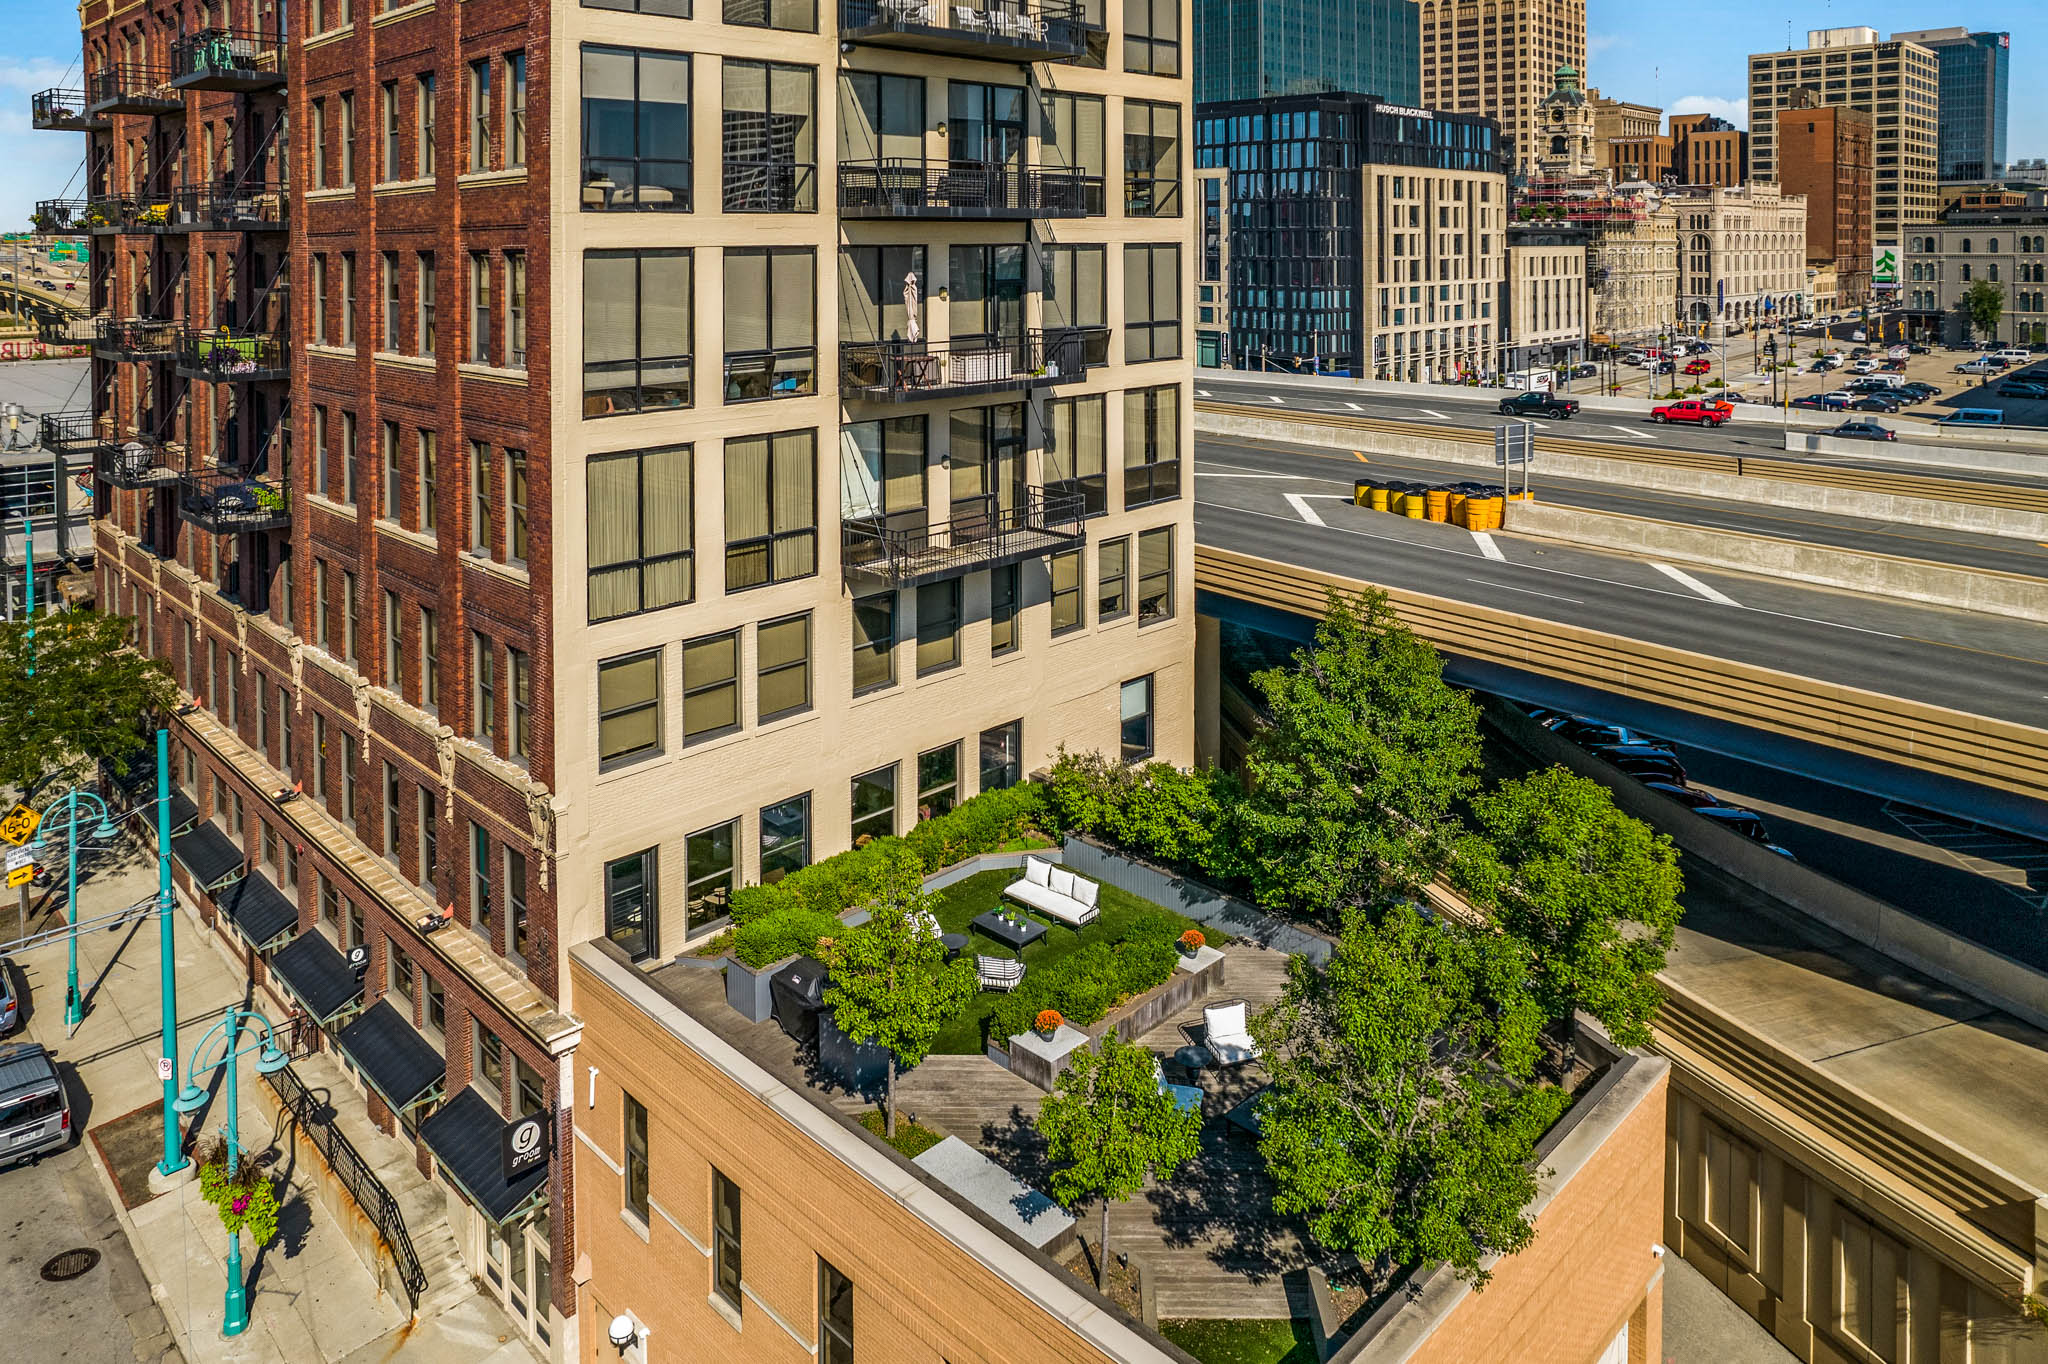  Home for Sale - 400 N. Broadway, Unit 301 Milwaukee, WI 53202-5510